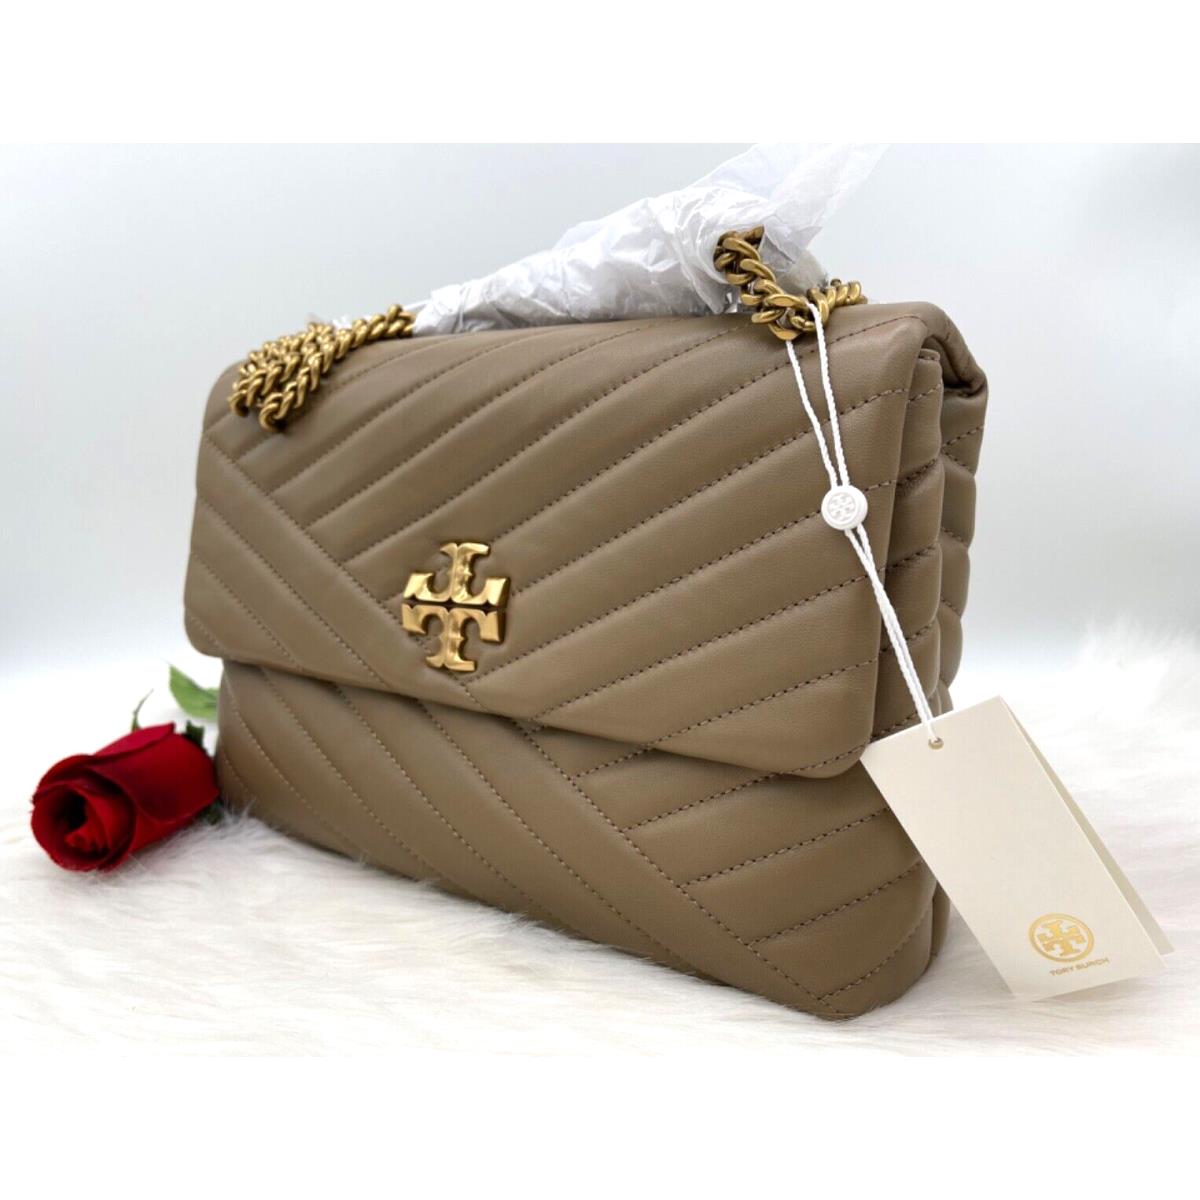 Tory Burch Kira Chevron Quilted Leather Convertible Bag -sandpiper - Tory  Burch bag - 078712617045 | Fash Brands